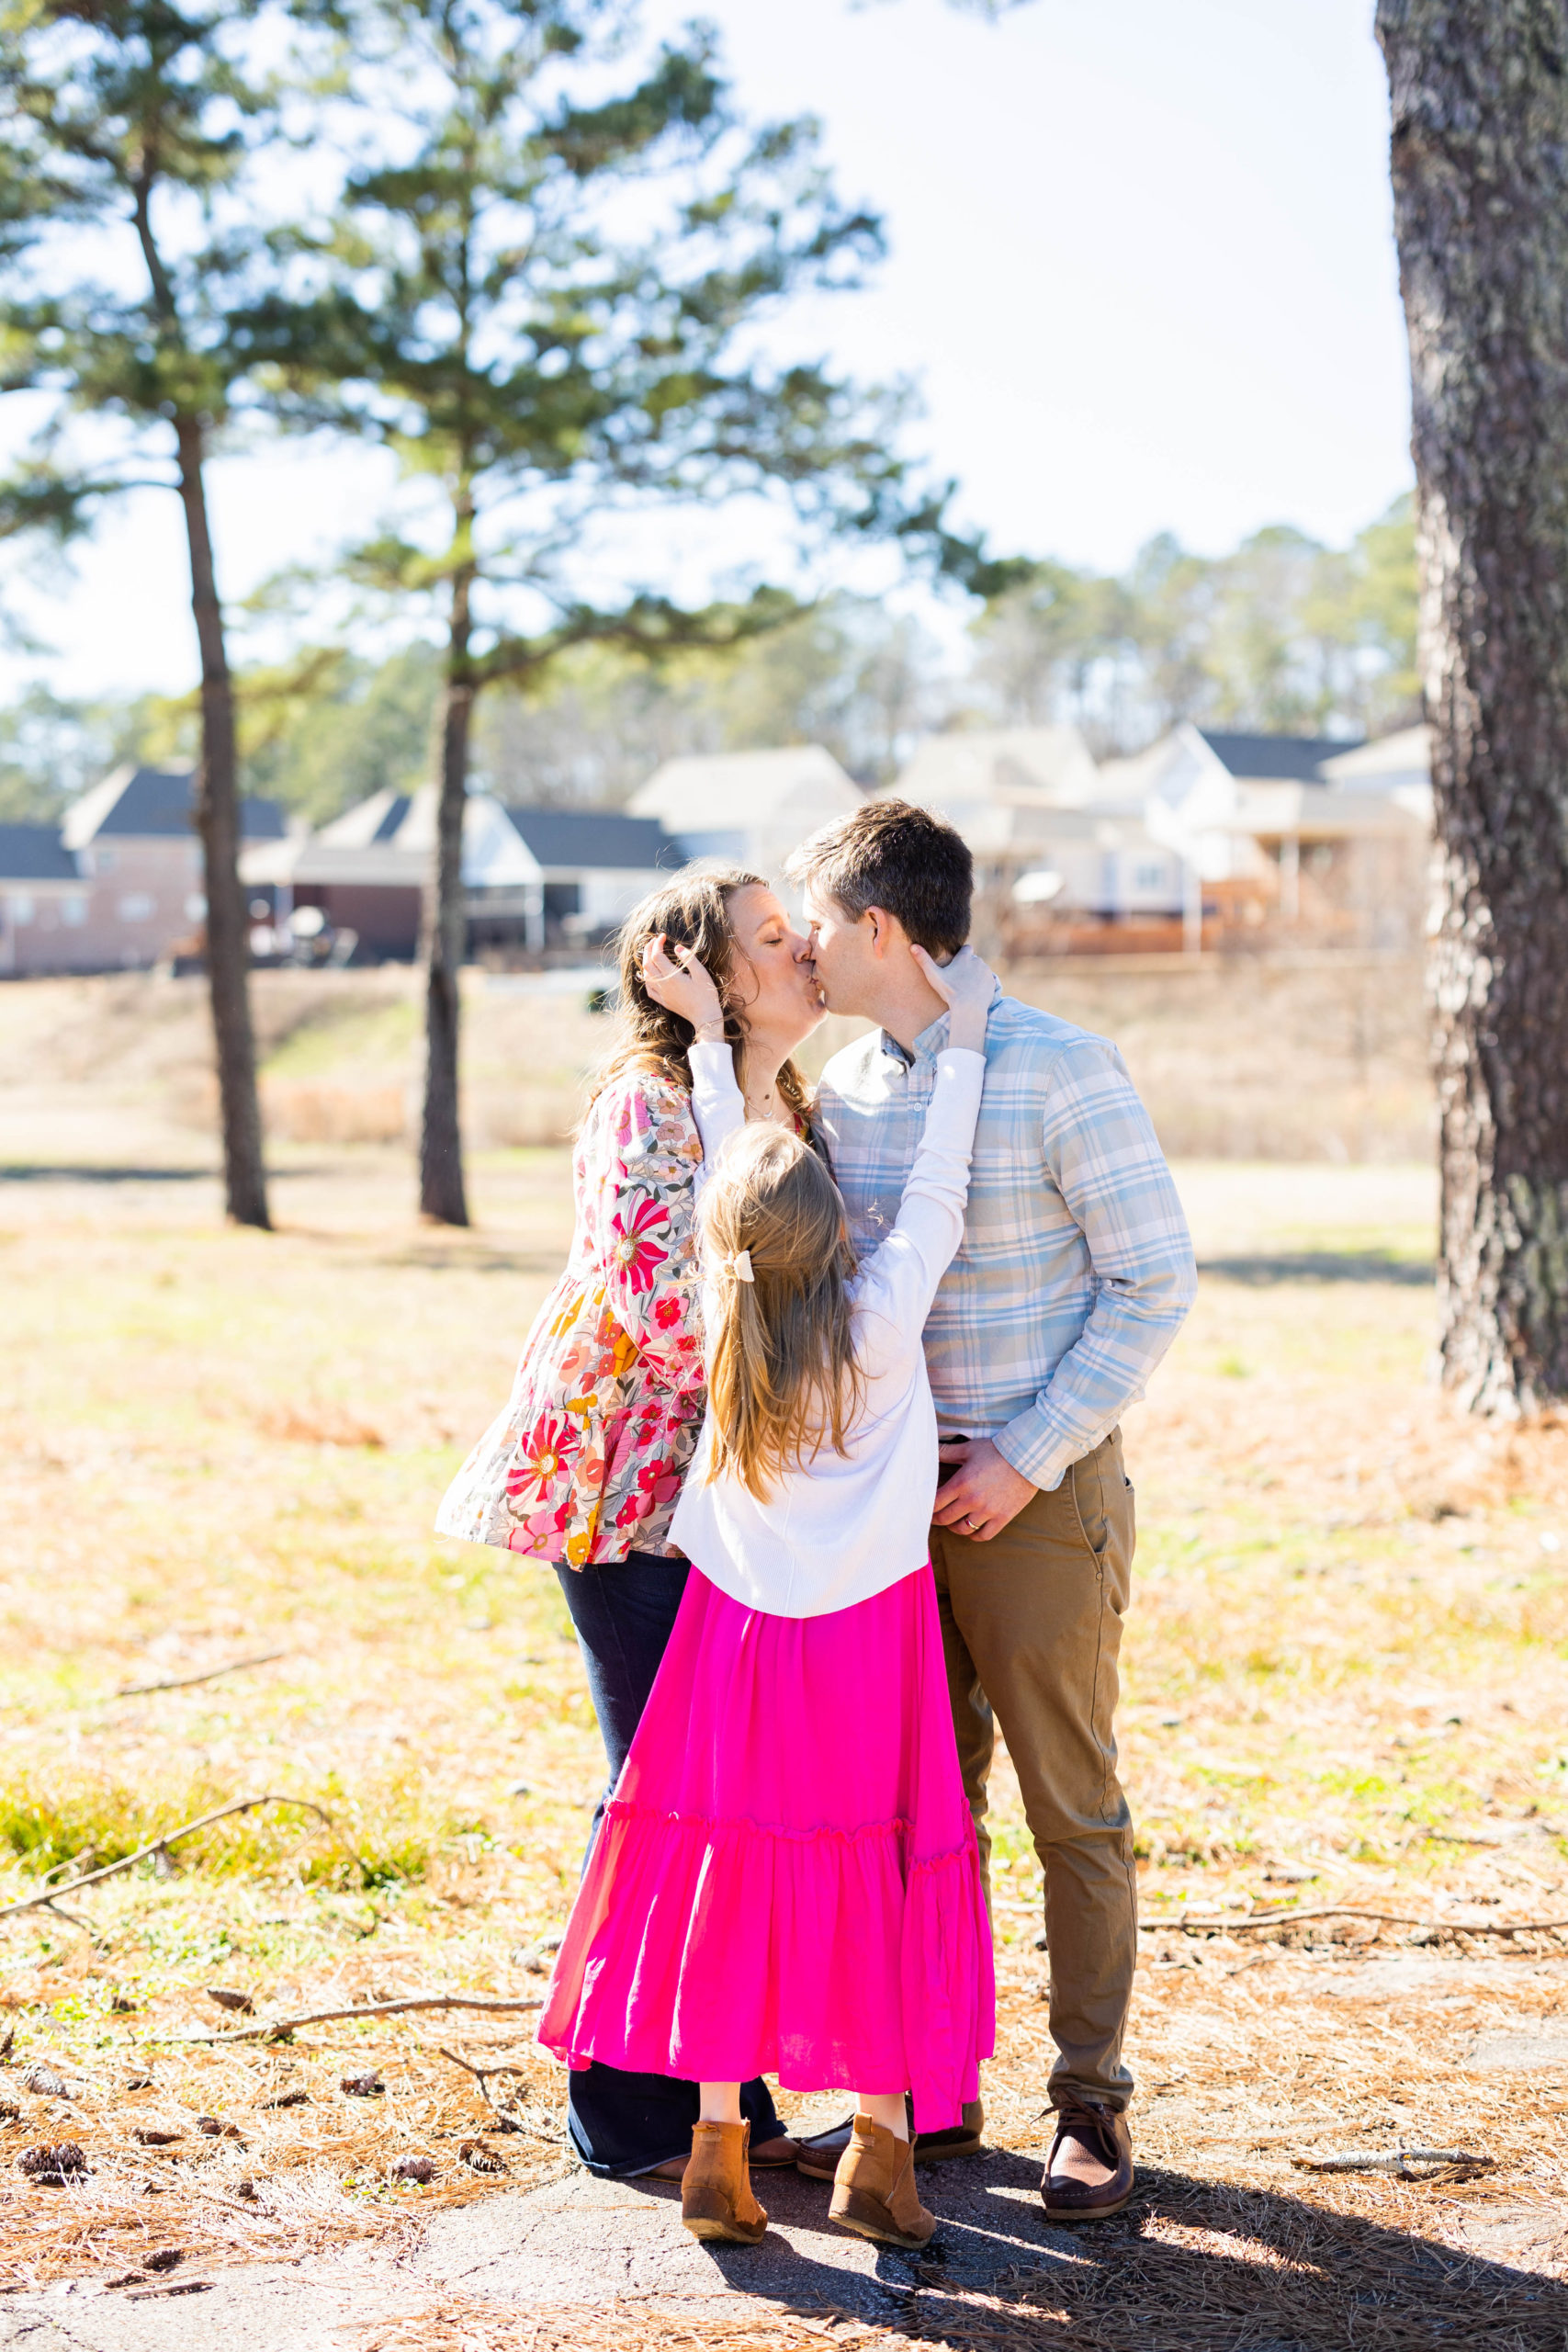 Eleanor Stenner Photography - a Birmingham, AL wedding photographer - photographs the Johnsons in her Valentine's Day Mini Sessions